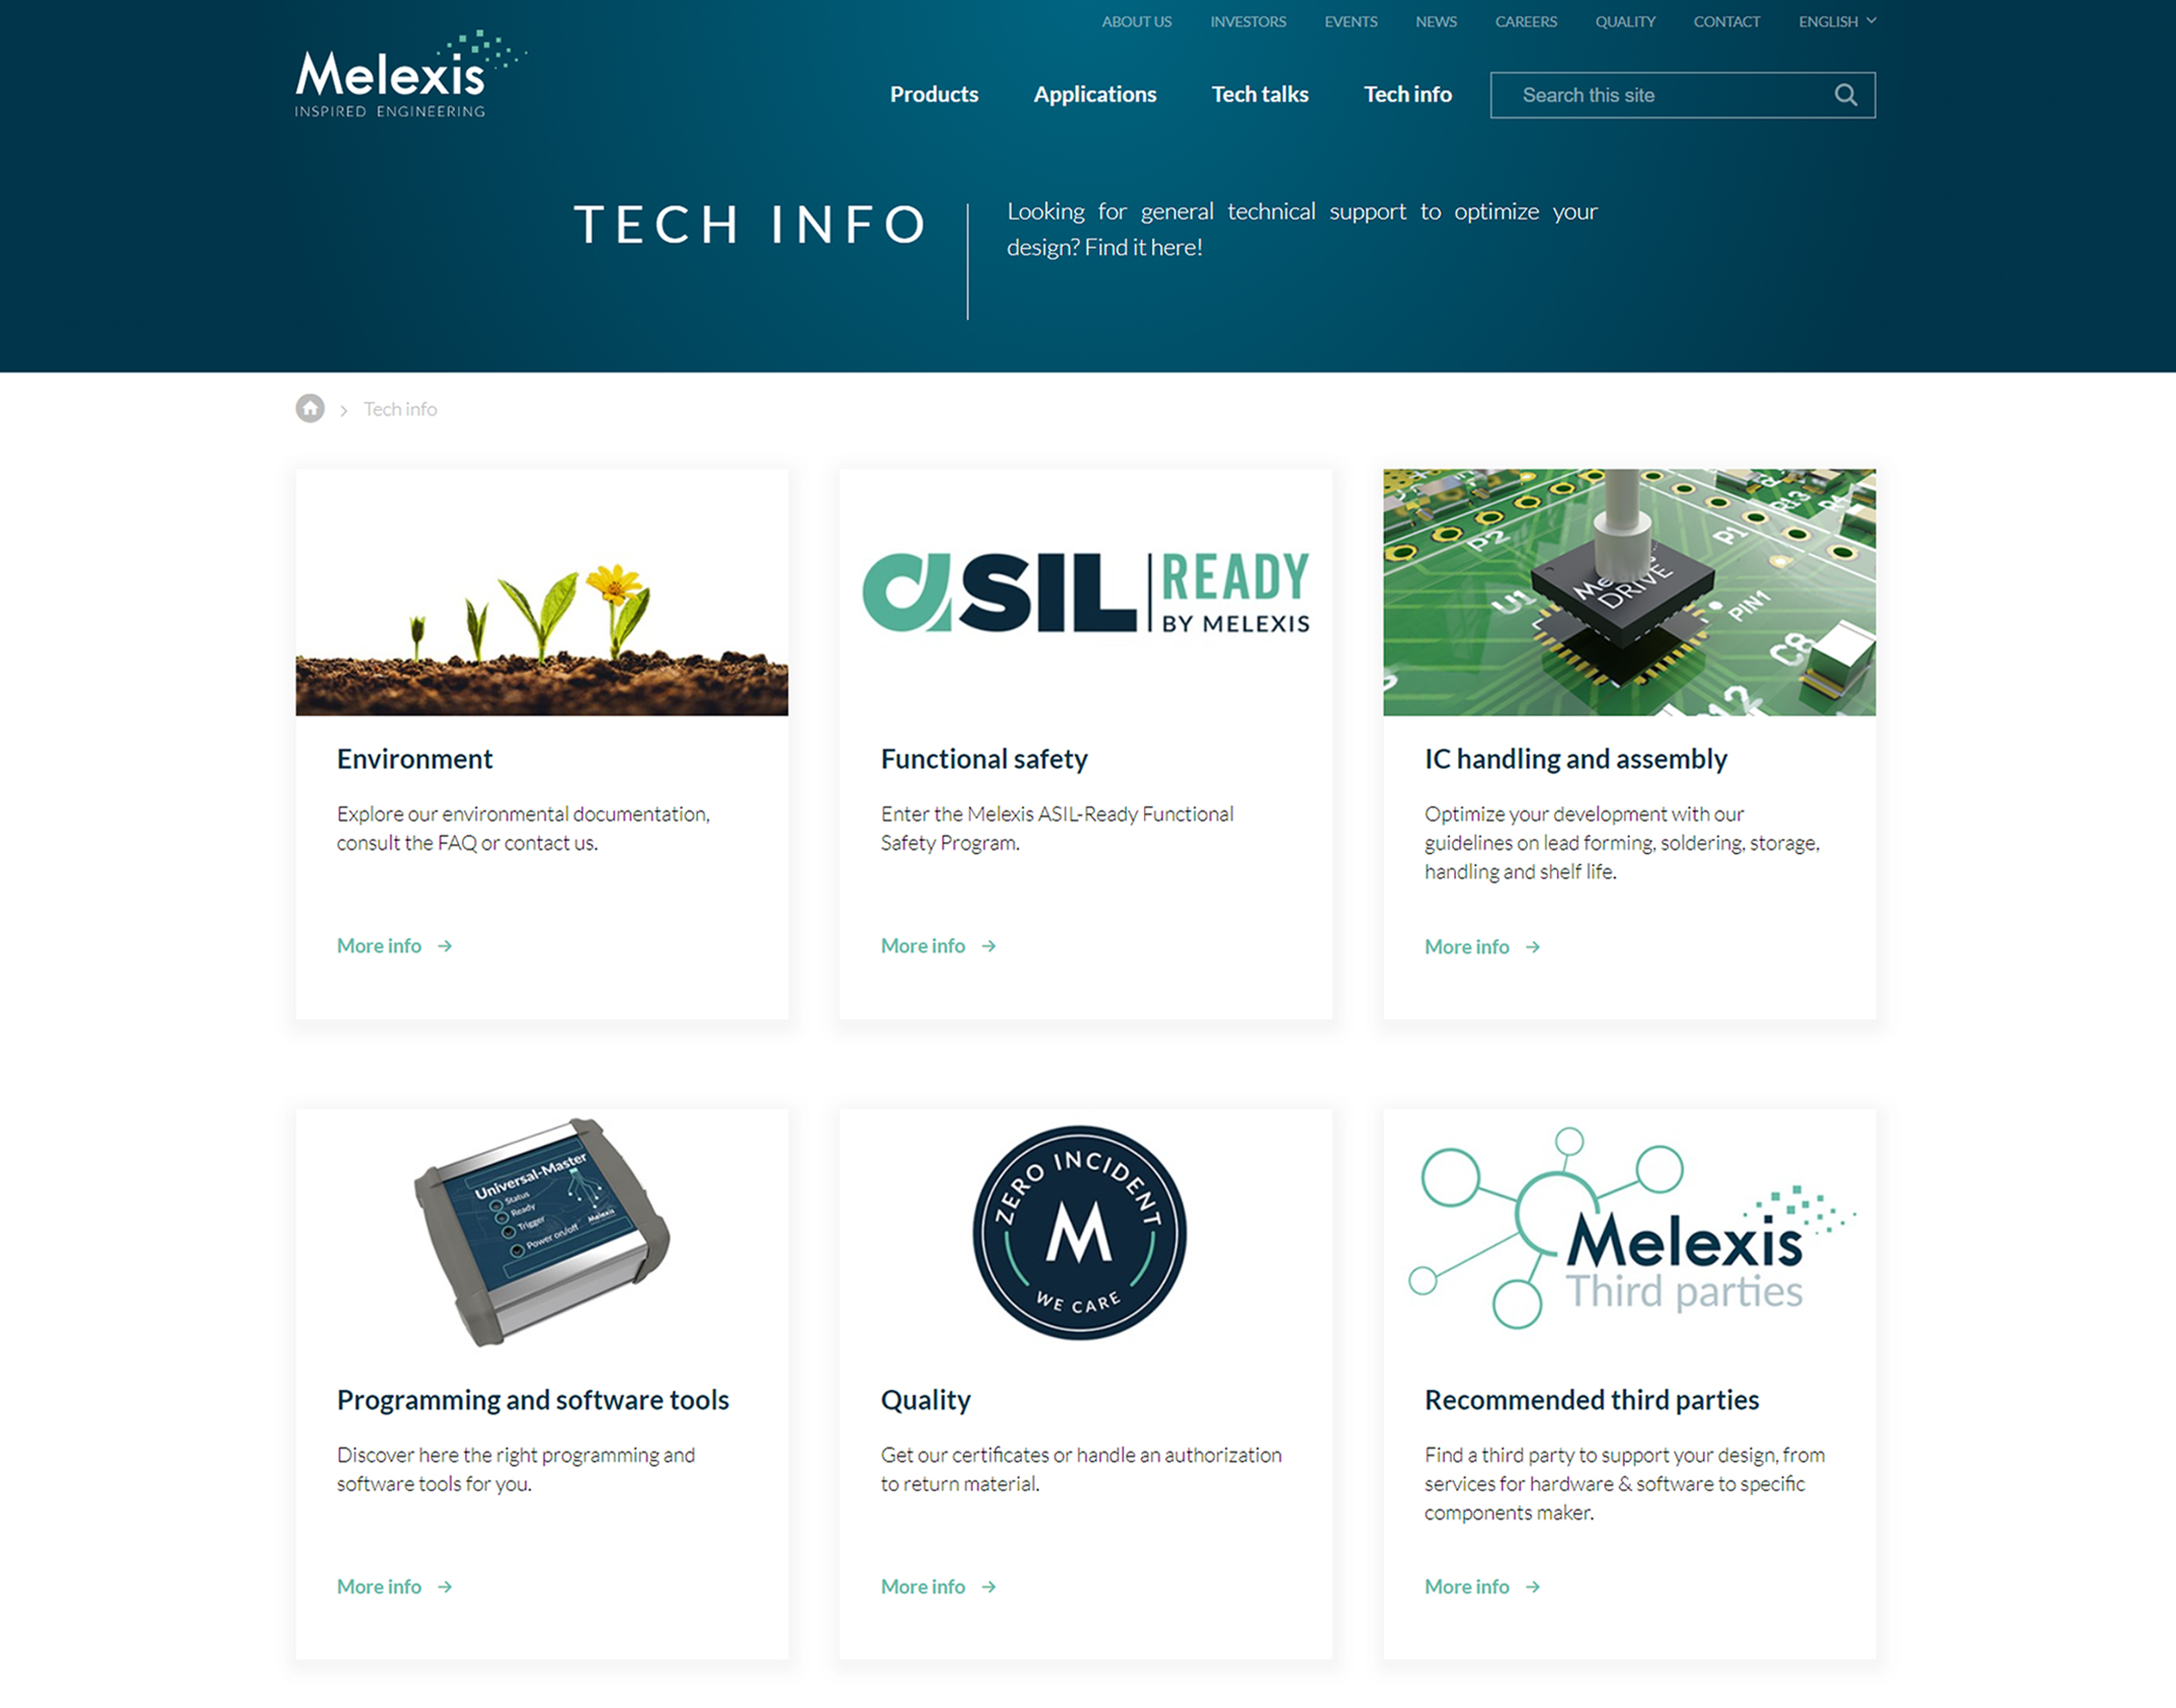 Tech info page #Melexis